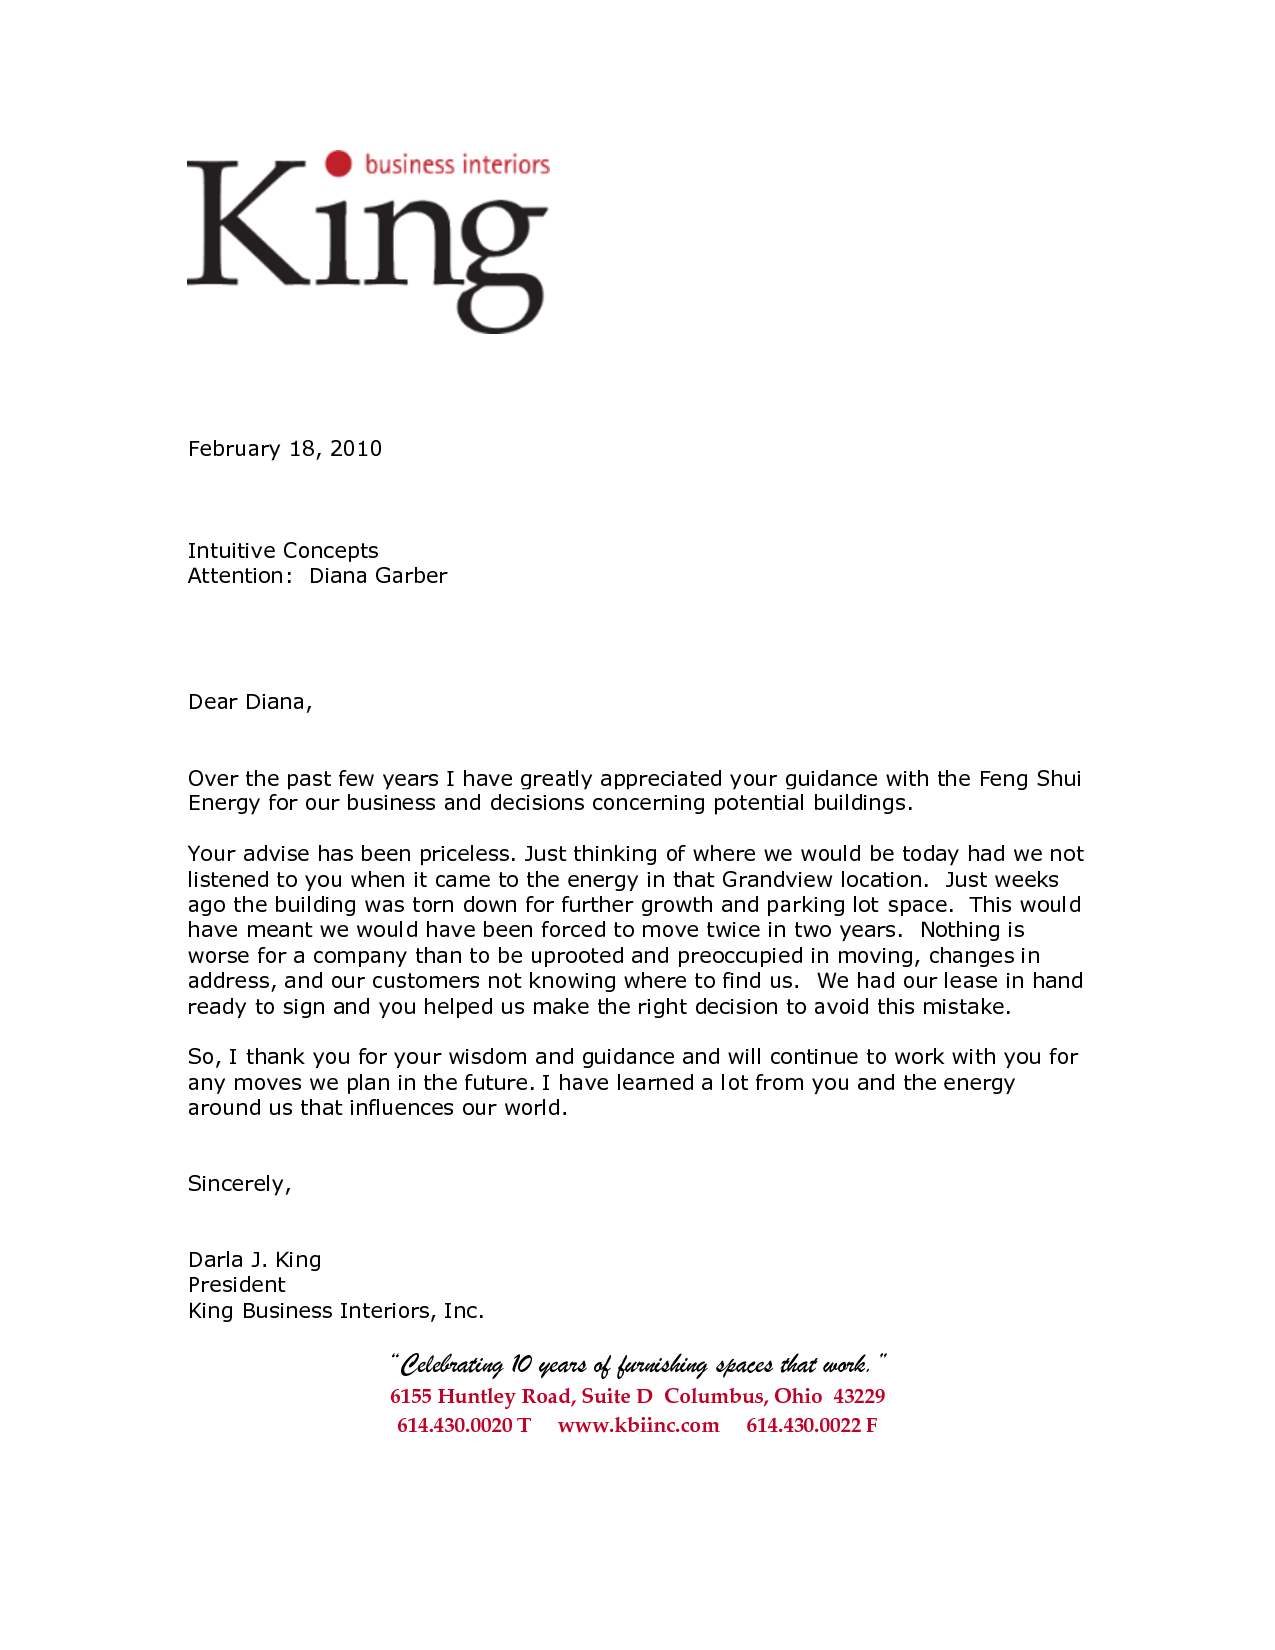 Business Letter Of Reference Template King Business inside dimensions 1275 X 1650